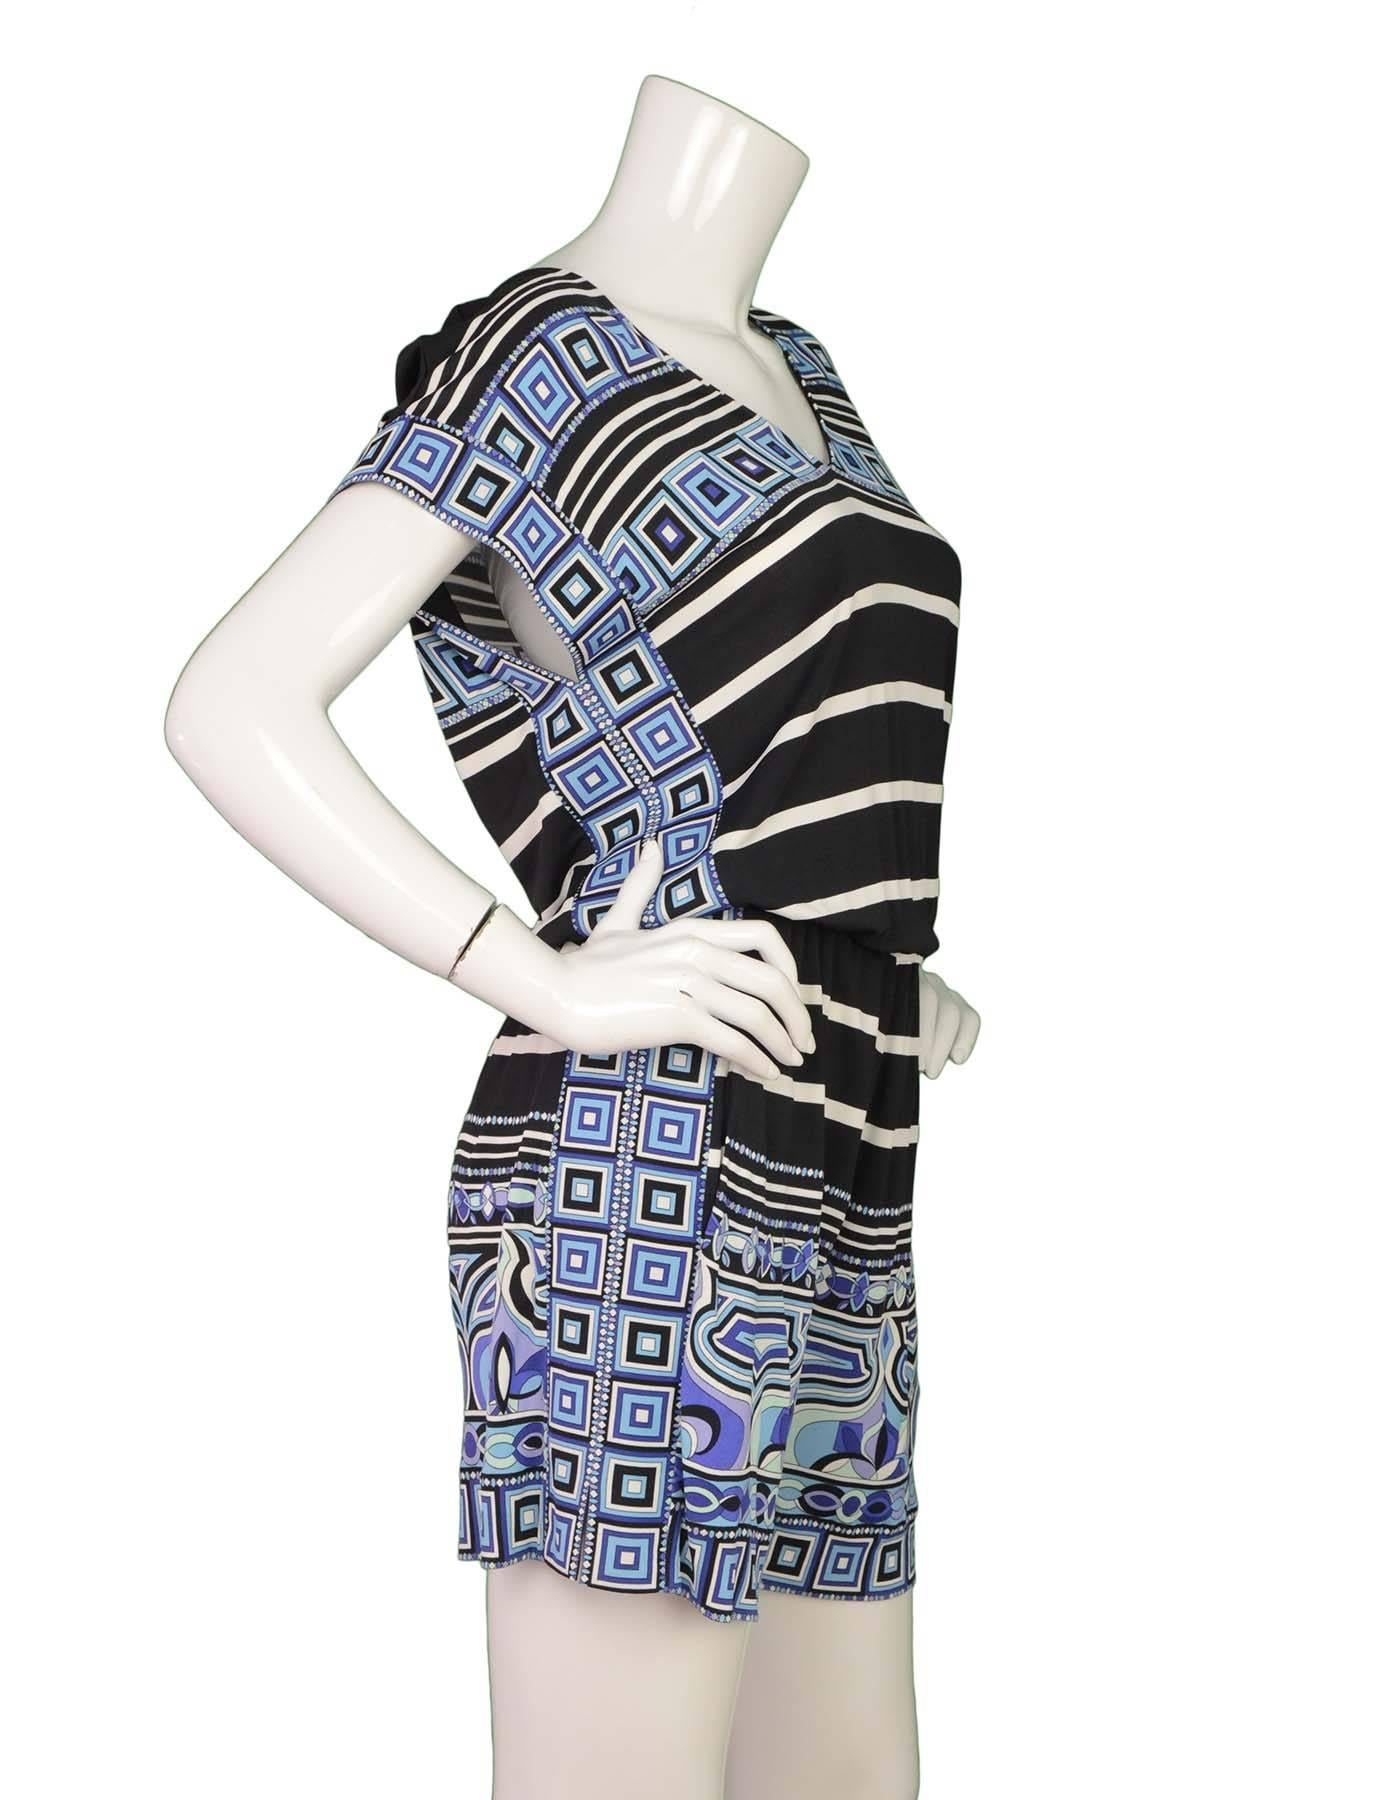 Emilio Pucci New Multi-Colored Printed Jersey Romper sz 4
Features V- neckline and an elasticized drop waist 
Made In: Italy
Color: Black, purple, white, and blue 
Composition: 83% Viscose and 17% silk
Lining: None
Closure/Opening: Slip on